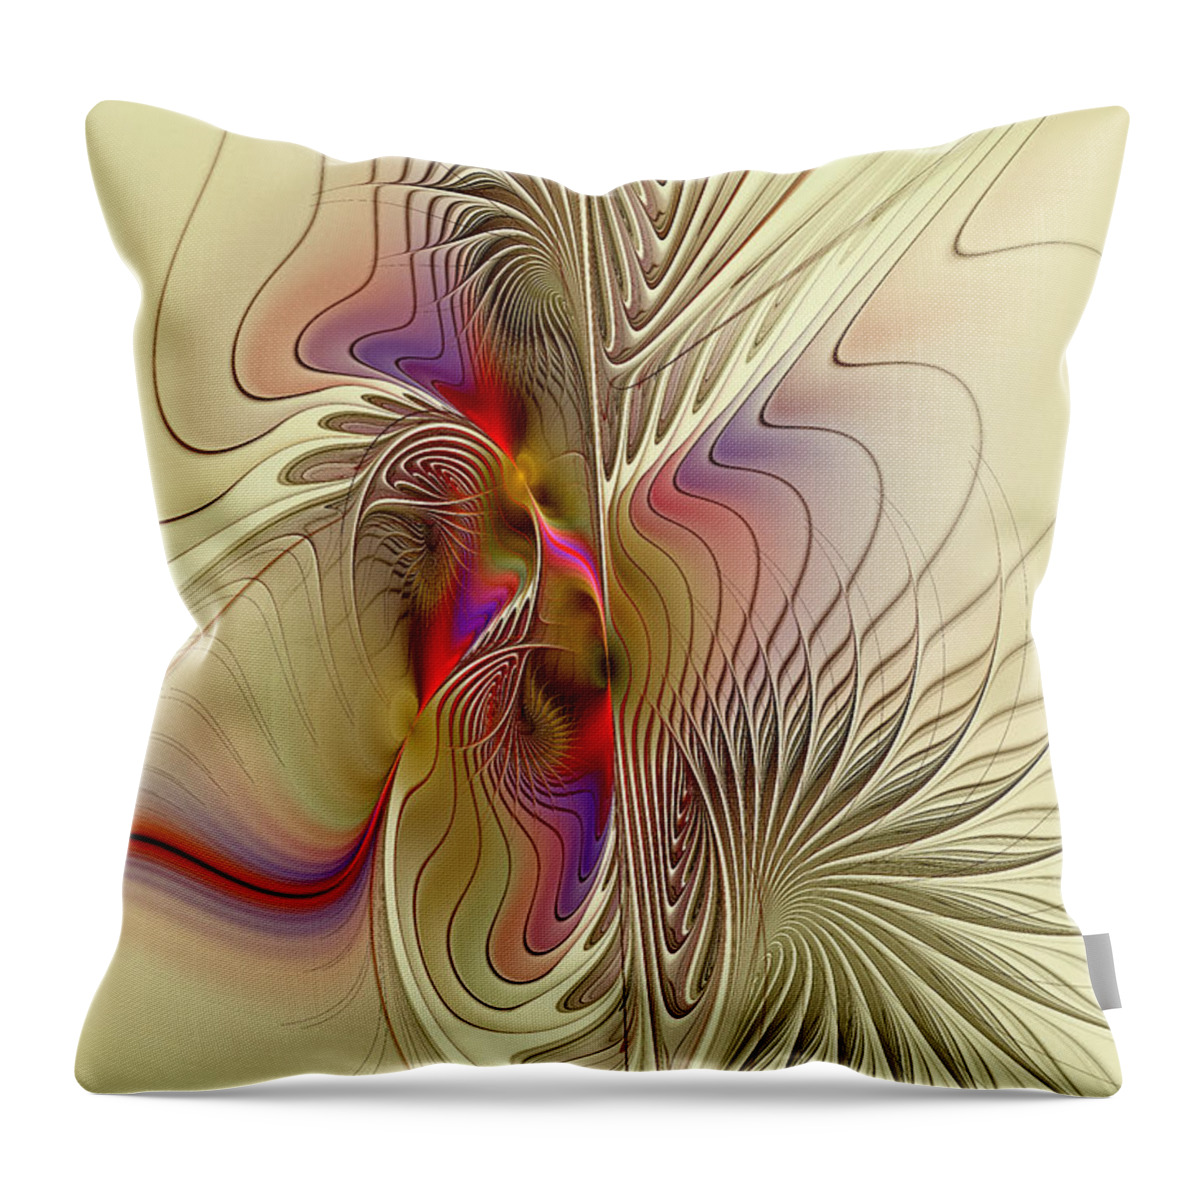 Passions Throw Pillow featuring the digital art Passions and Desires by Deborah Benoit